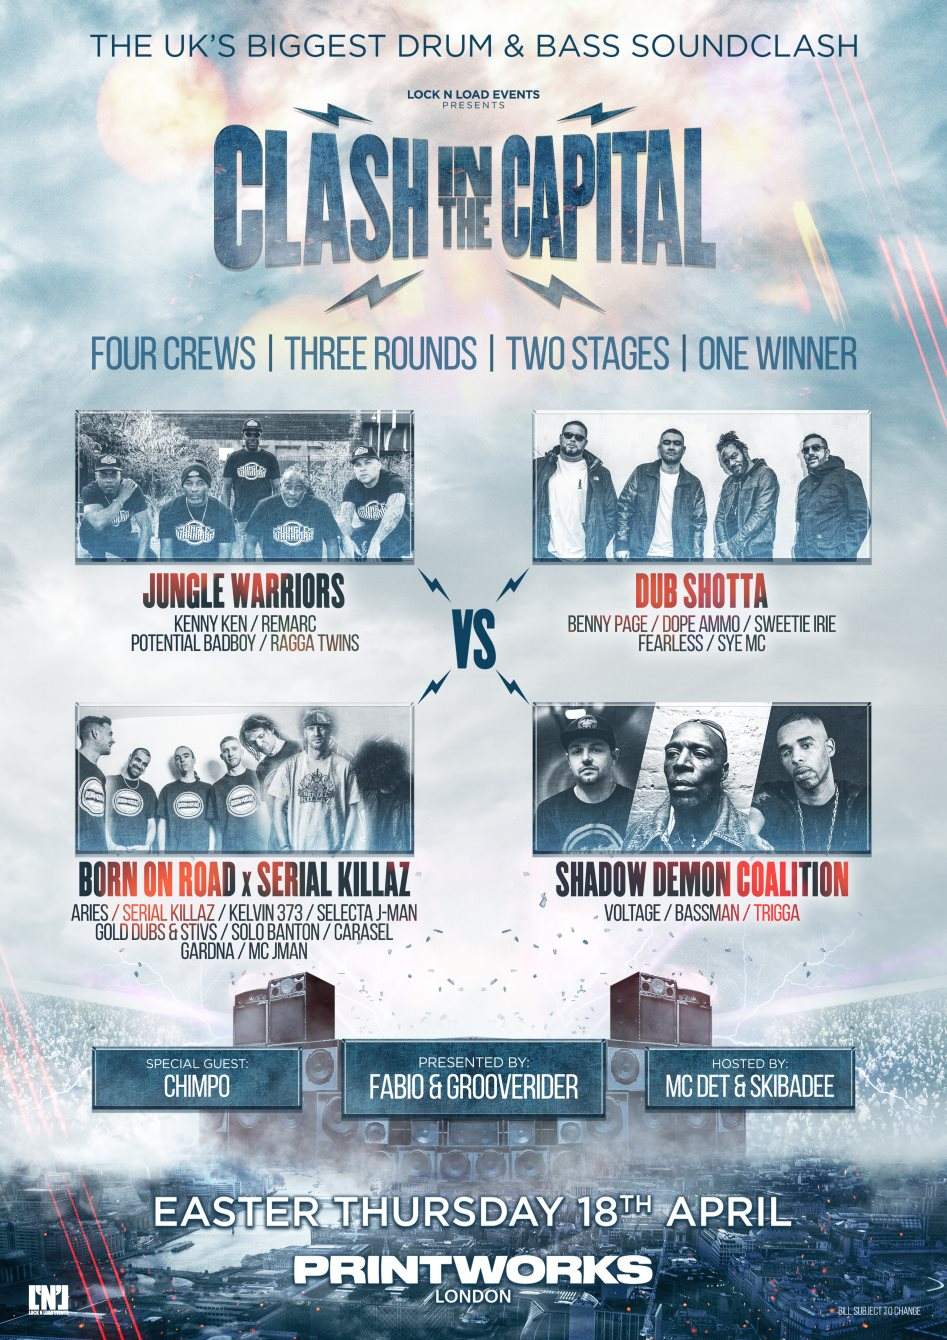 Clash In The Capital - The Uk's Biggest D&B Sound Clash - フライヤー表